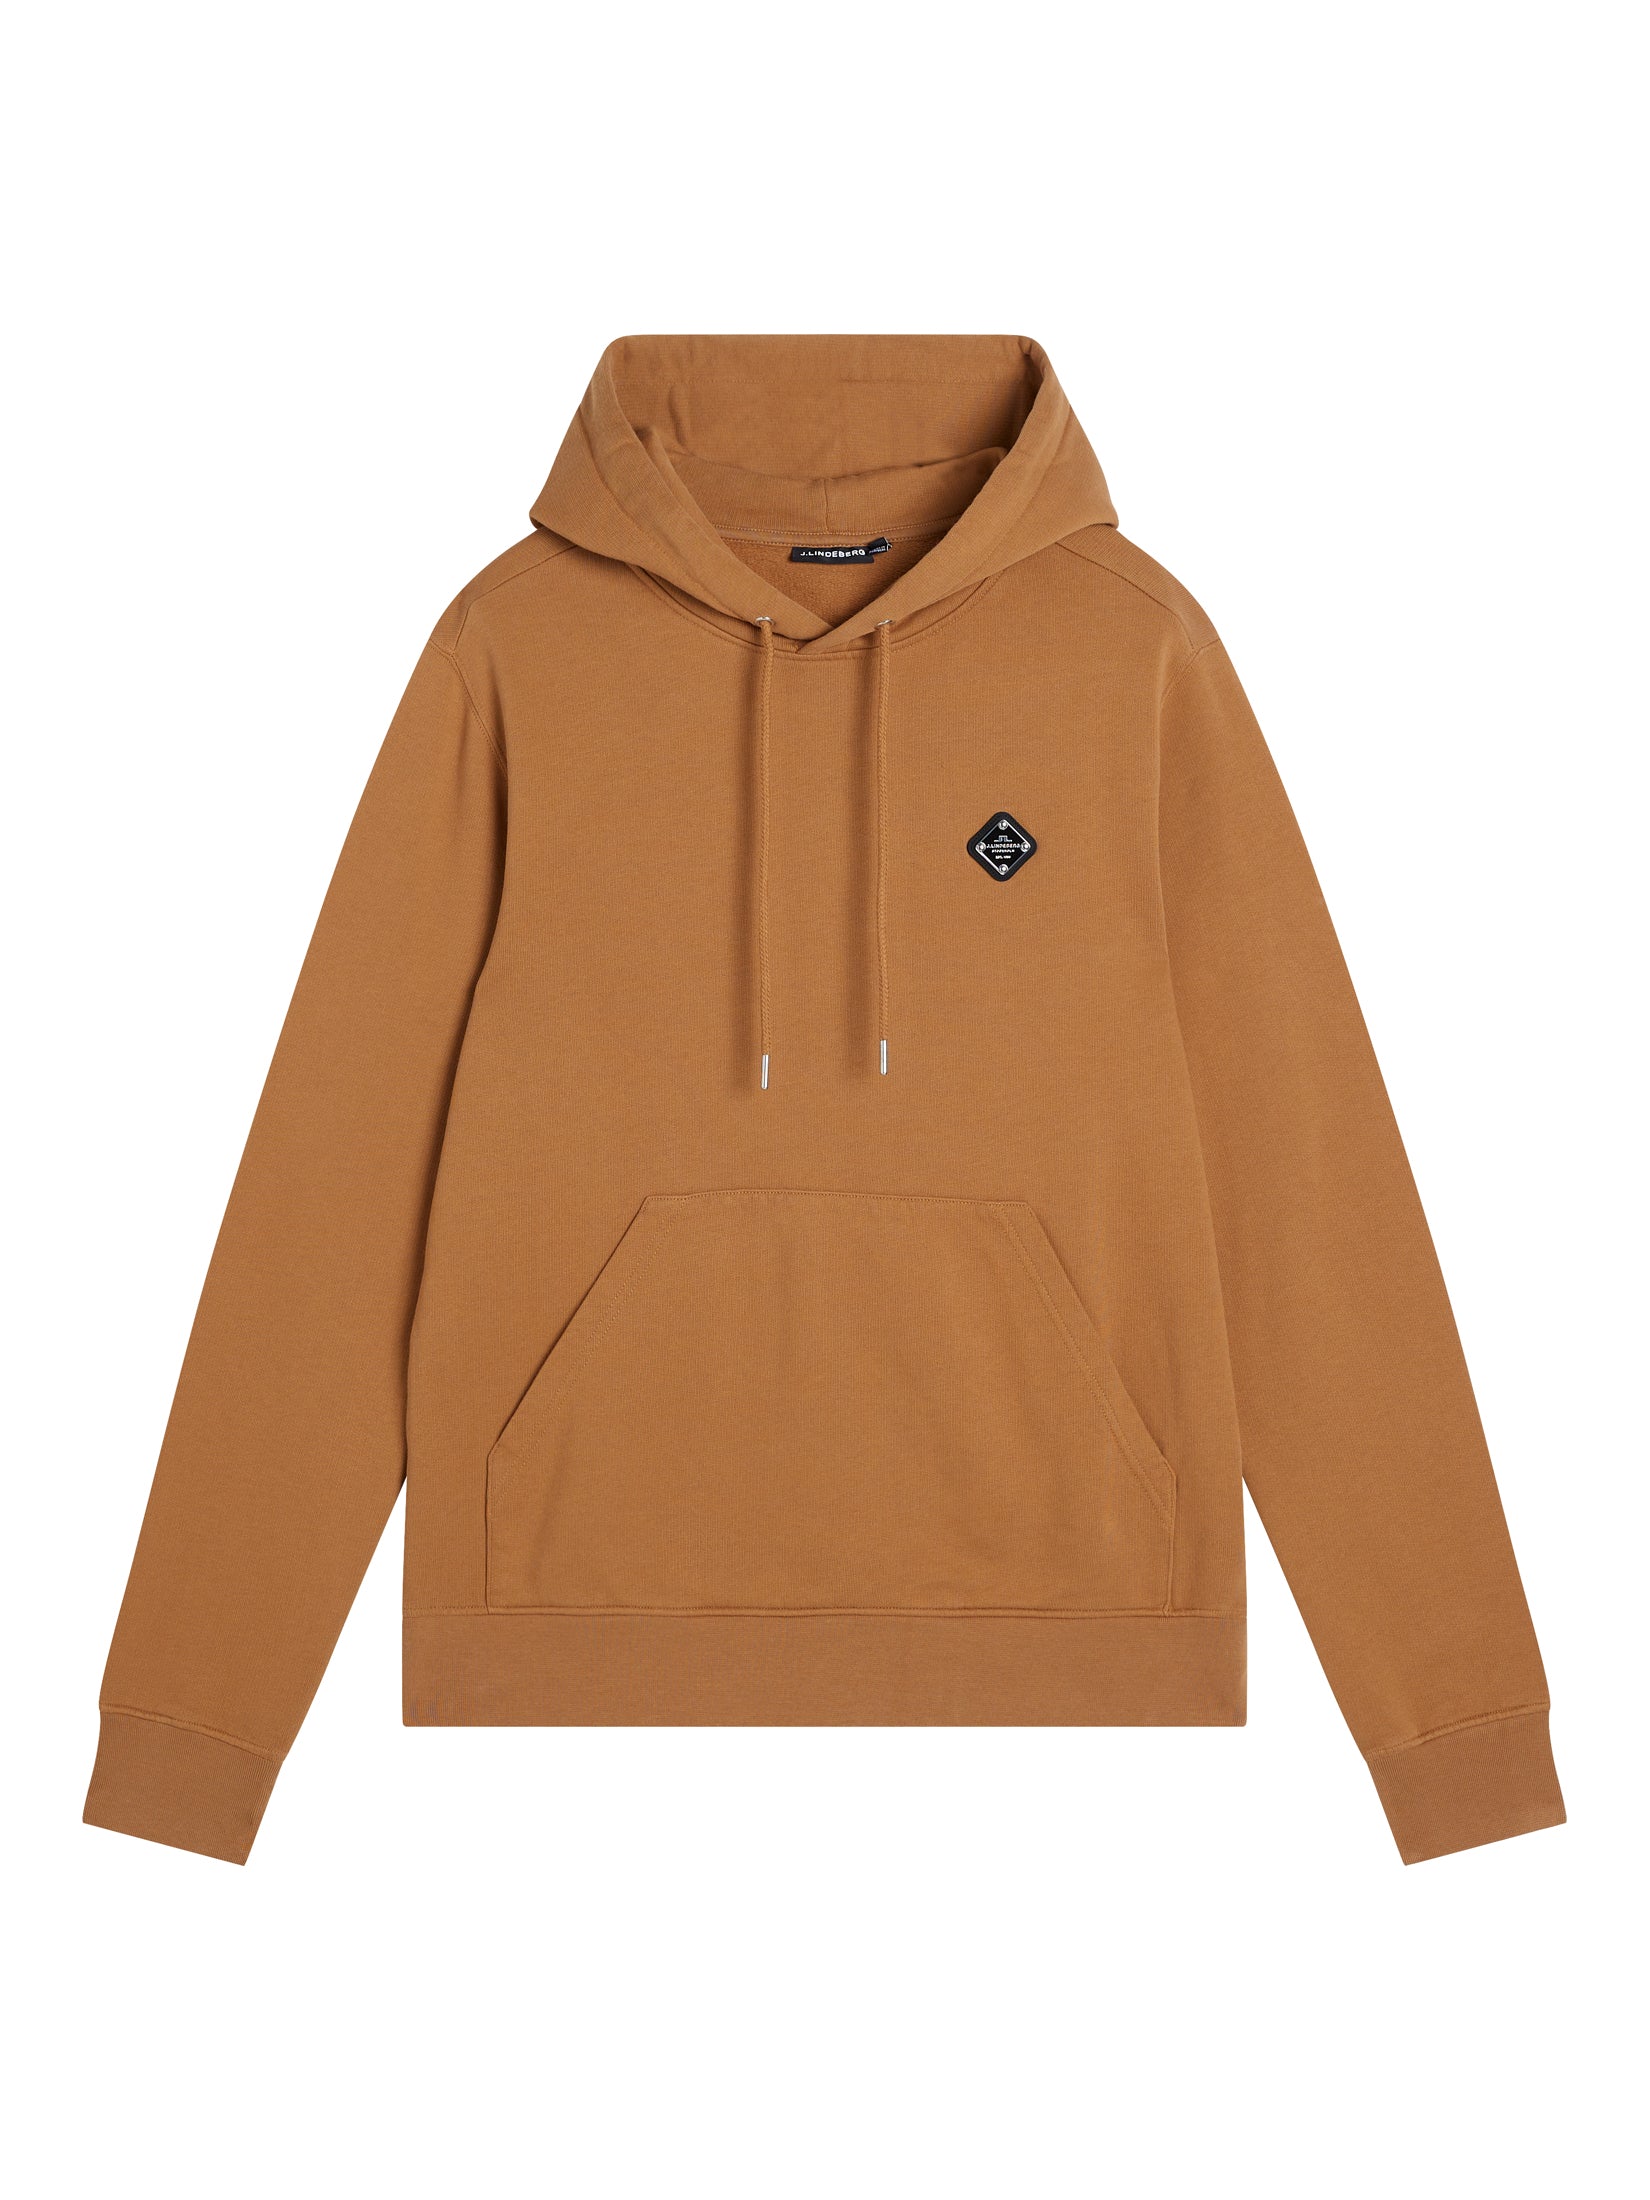 Throw Patch Hoodie